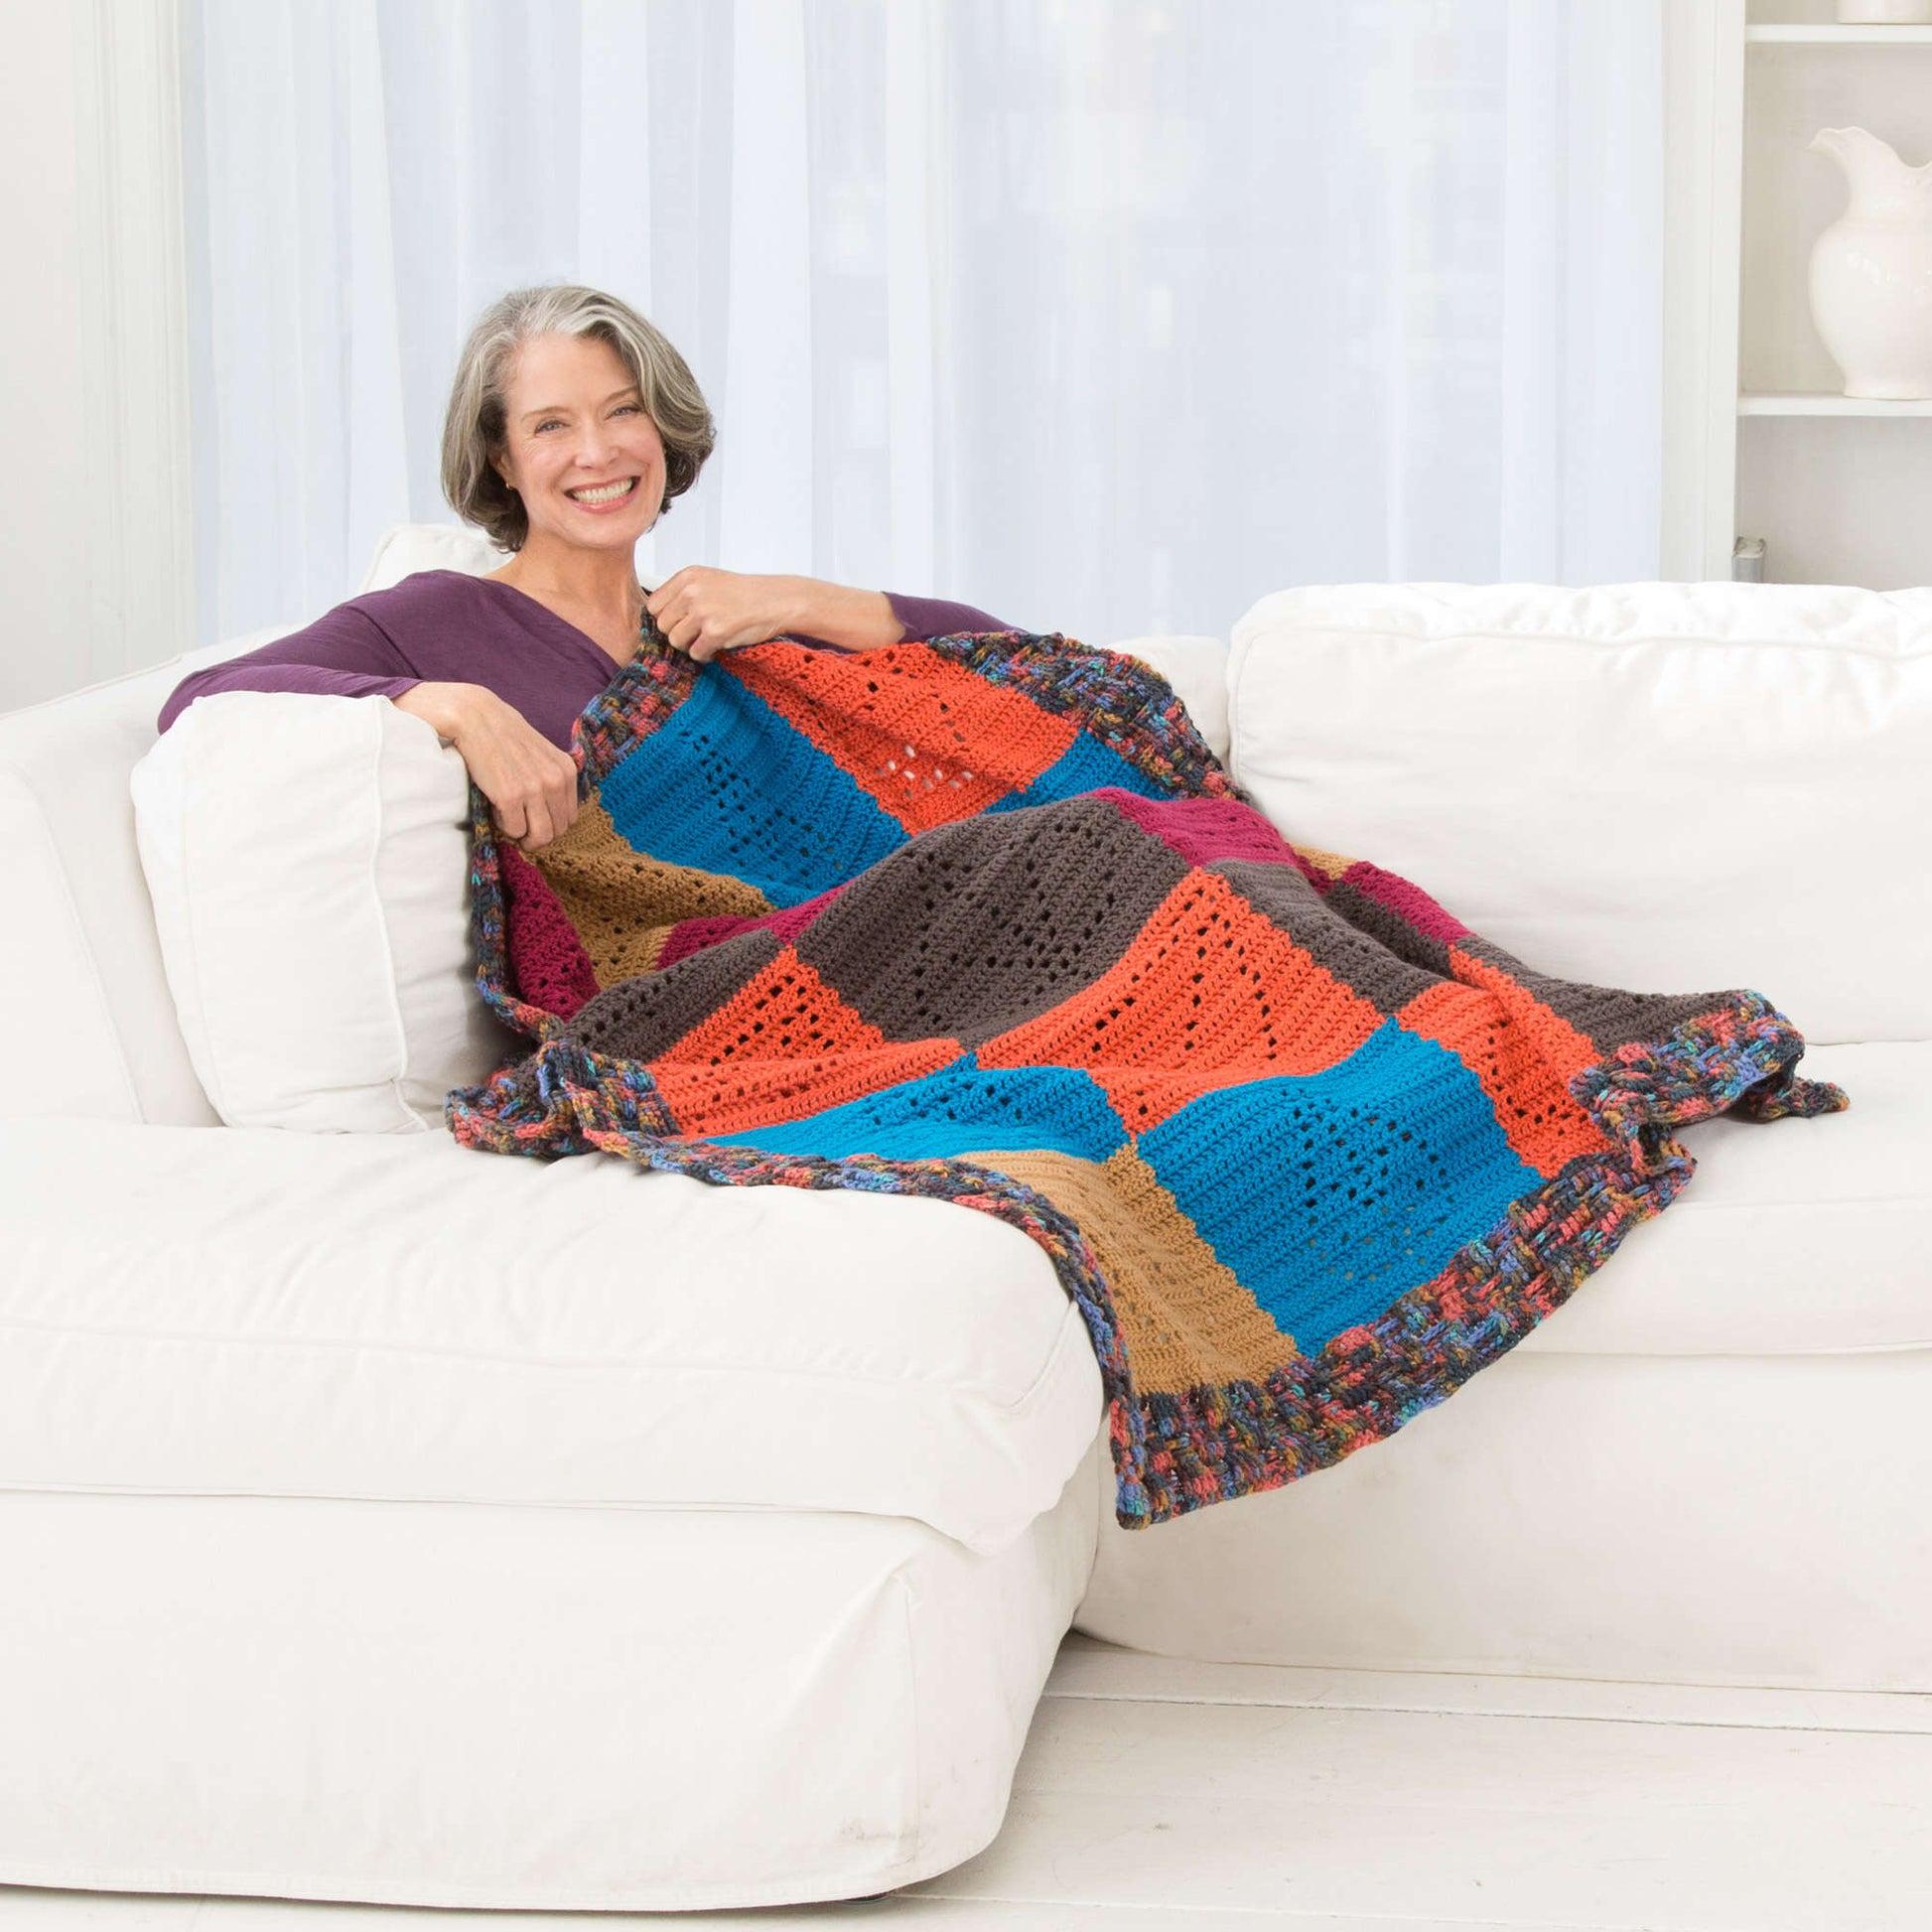 Free Red Heart Caring Comfort Crochet Throw Pattern